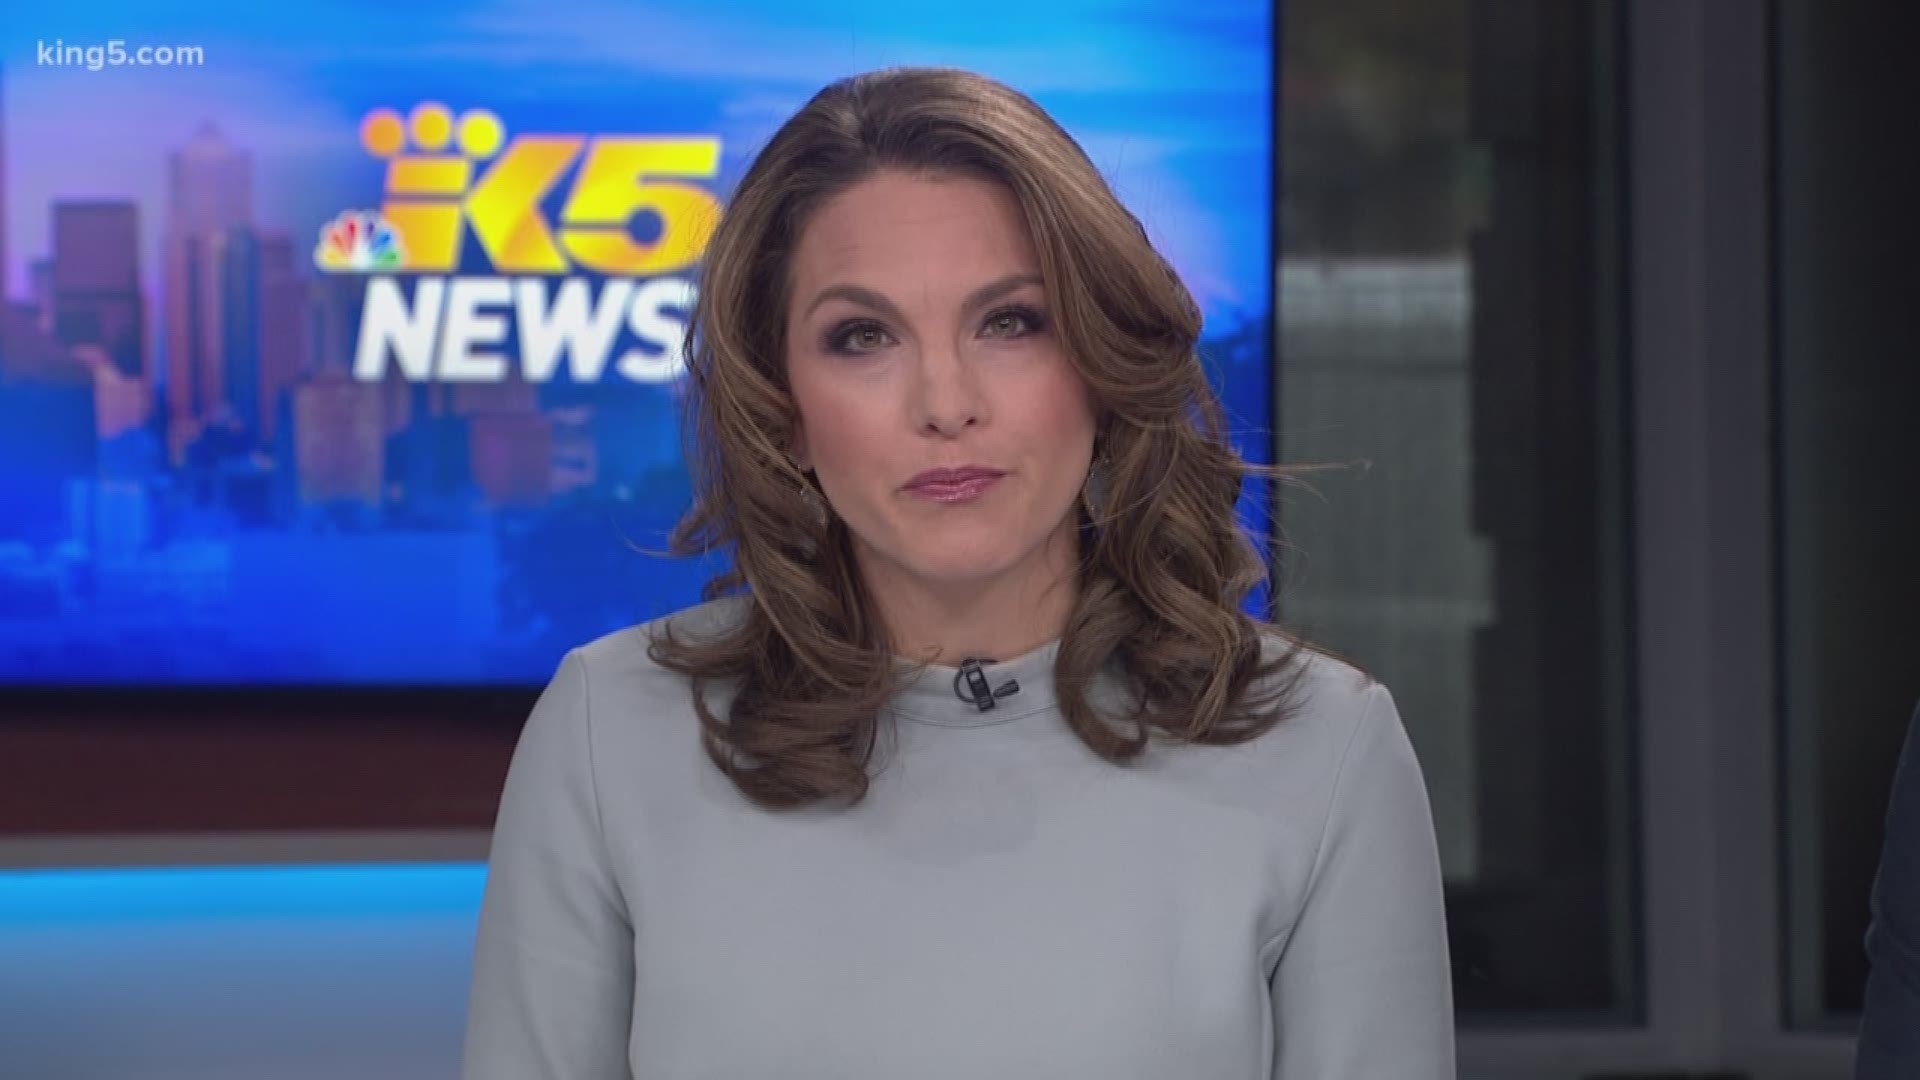 MeToo Seattle news anchor shares personal story of sexual assault